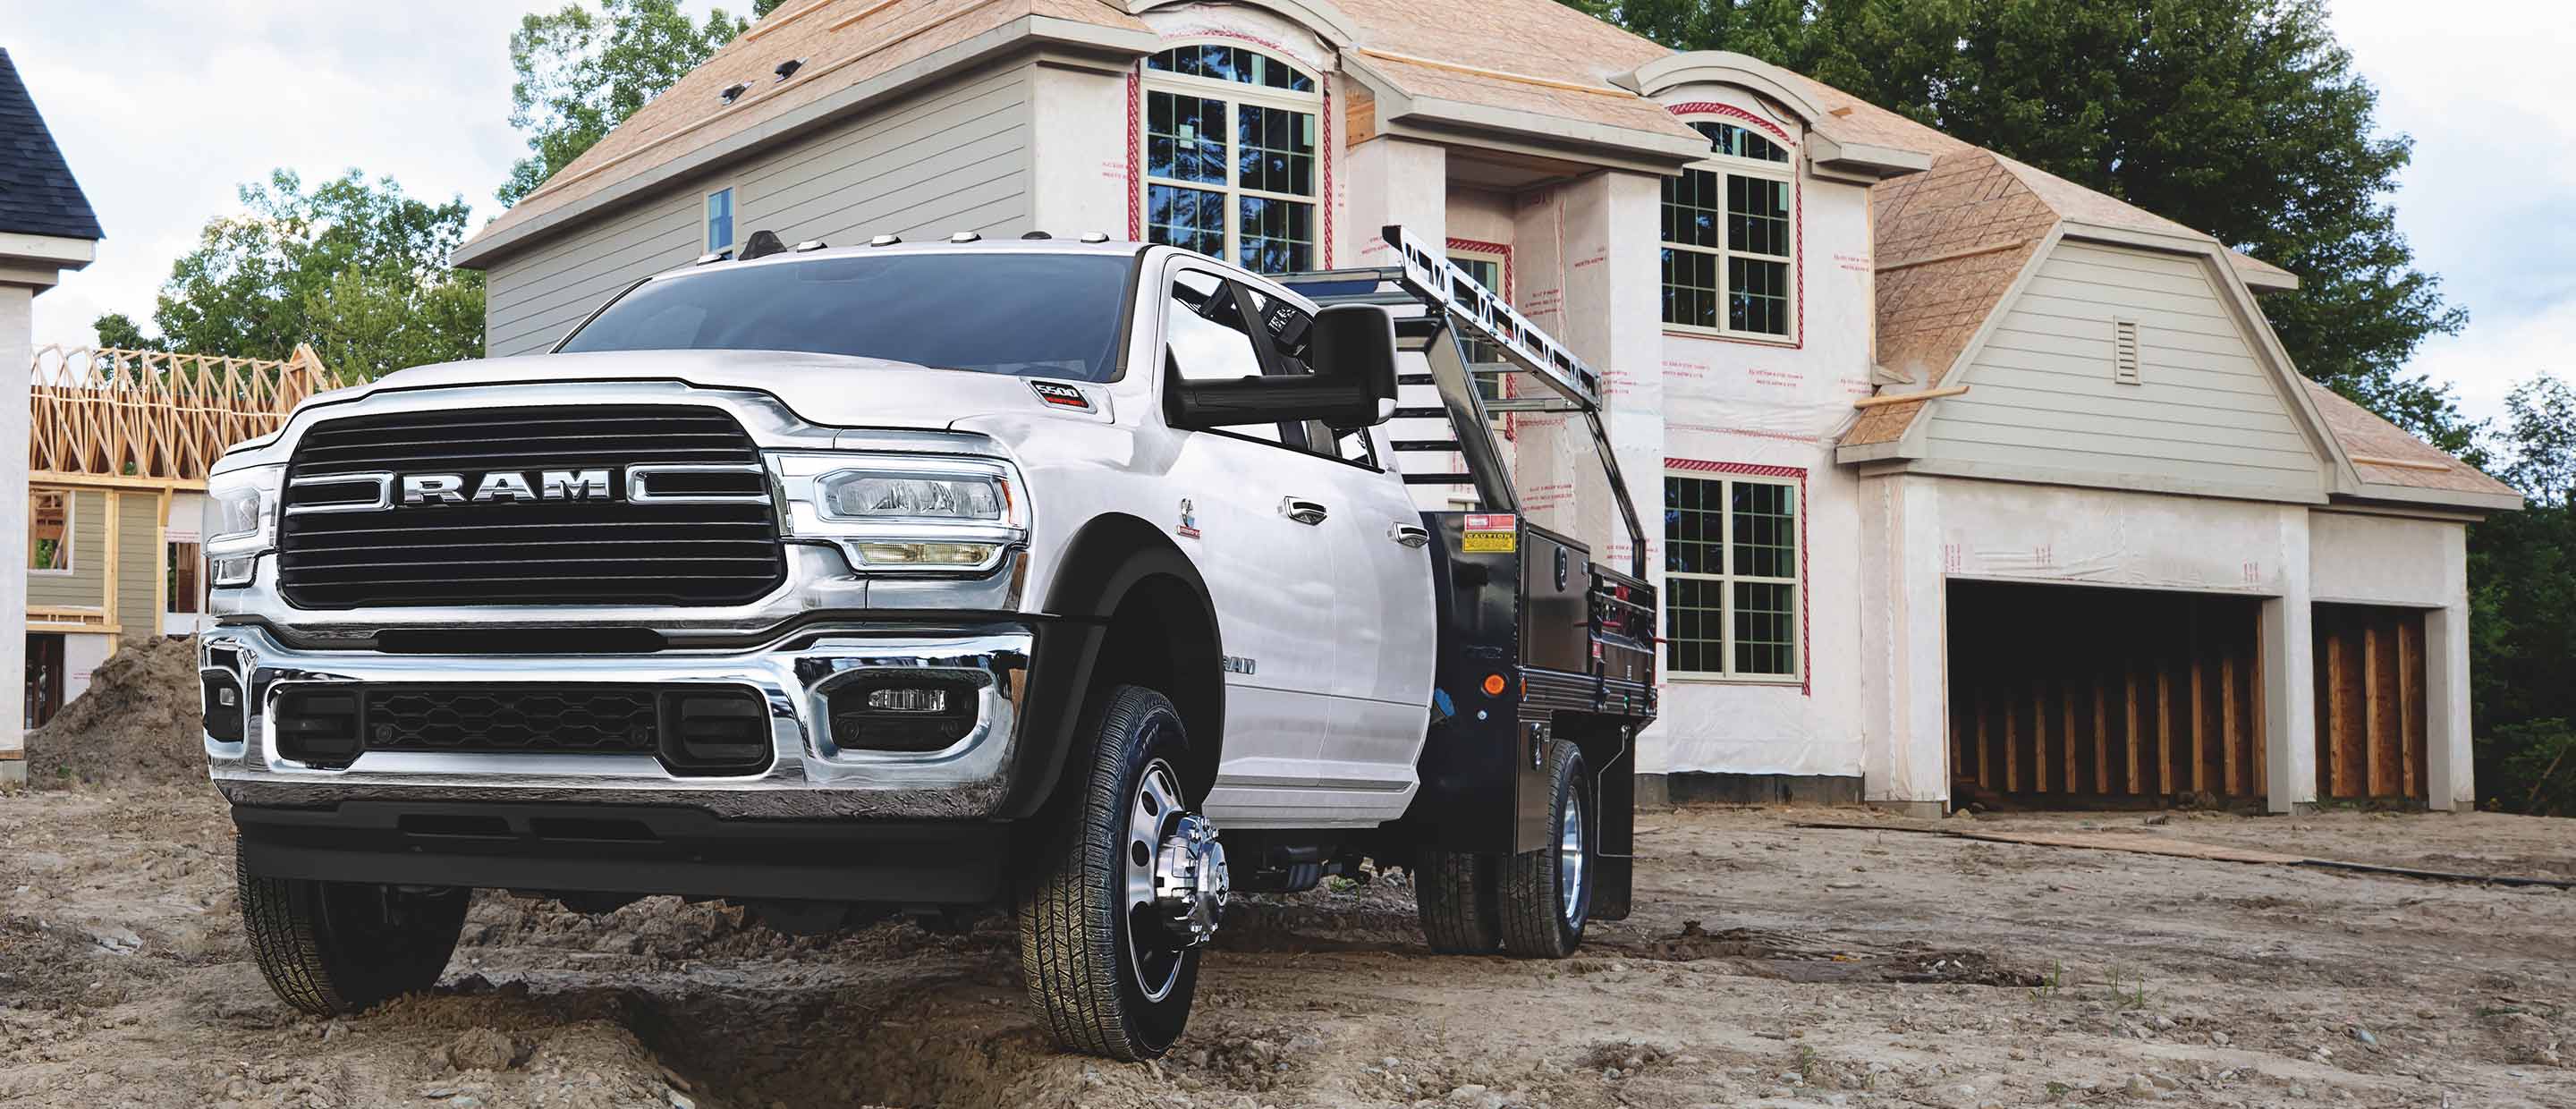 The 2022 Ram Chassis Cab with a ladder rack upfit, parked on the muddy ground beside a home under construction.